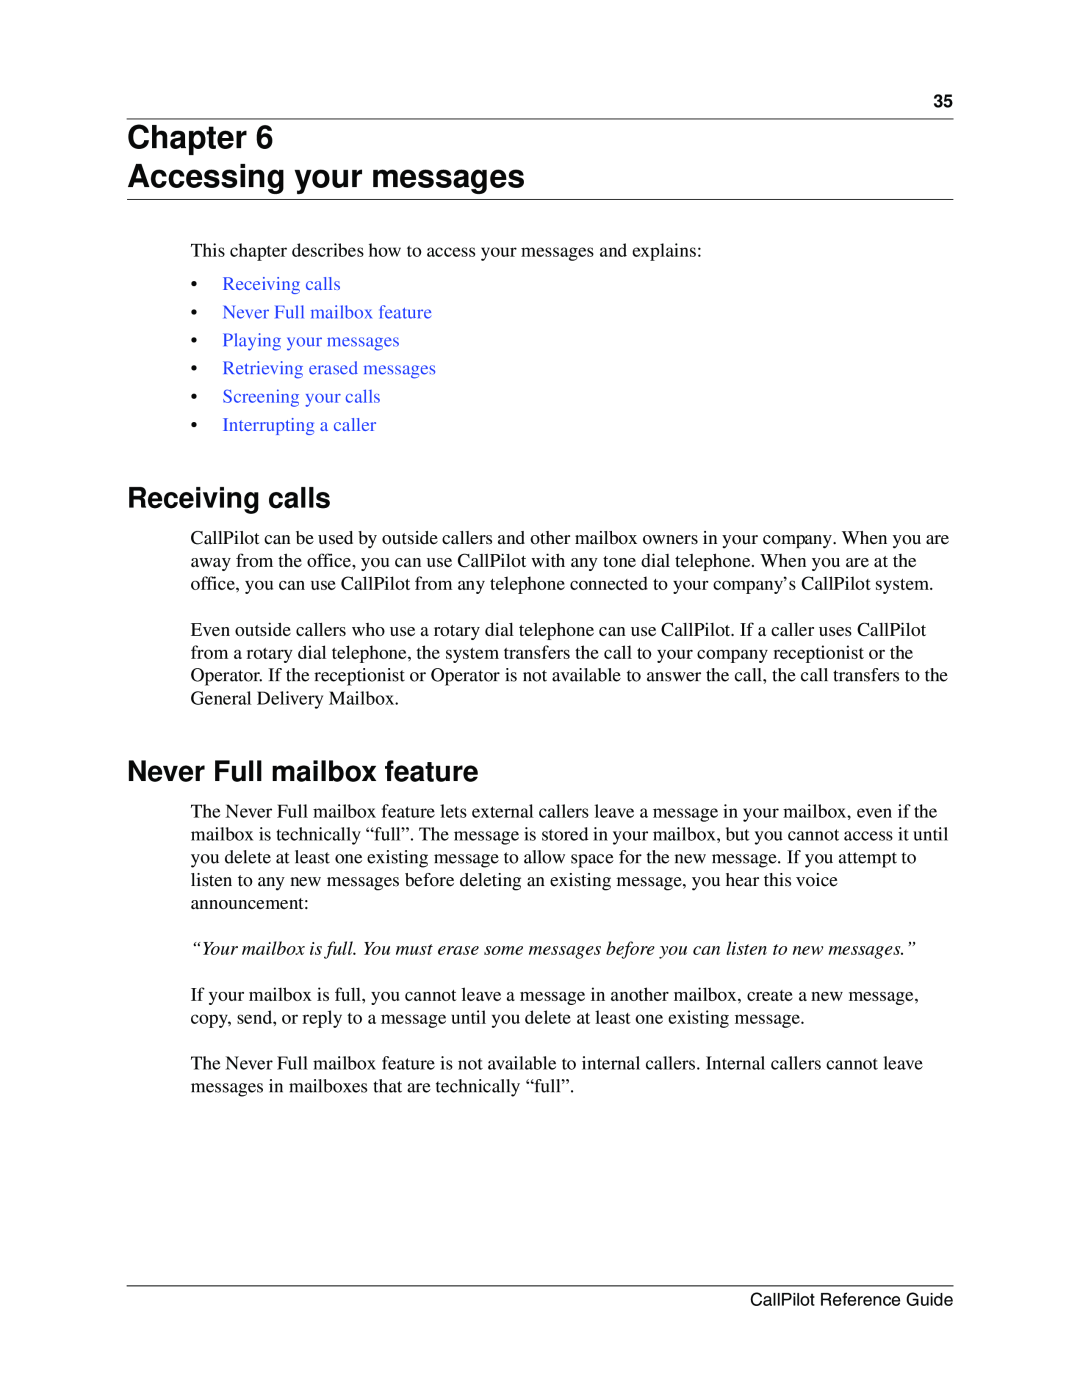 Nortel Networks CallPilot manual Chapter Accessing your messages, Receiving calls, Never Full mailbox feature 